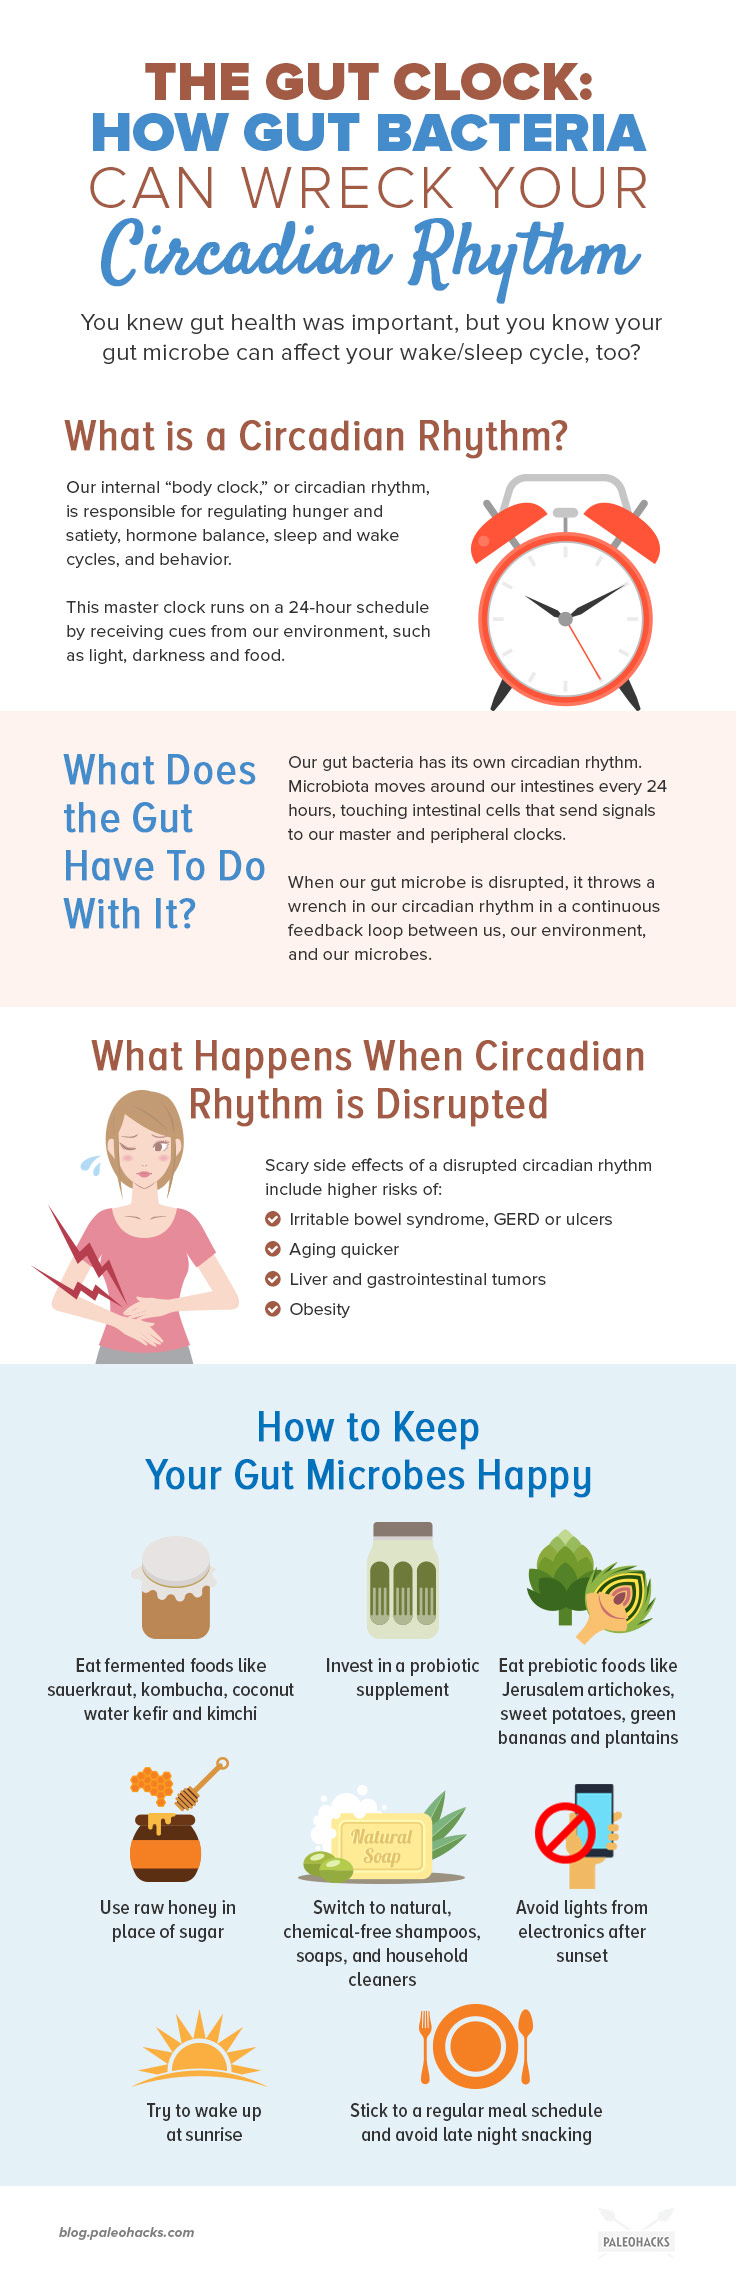 Research is now showing that our gut microbes can affect our circadian rhythm, which can alter our behavior, mood, energy levels and gastrointestinal health.